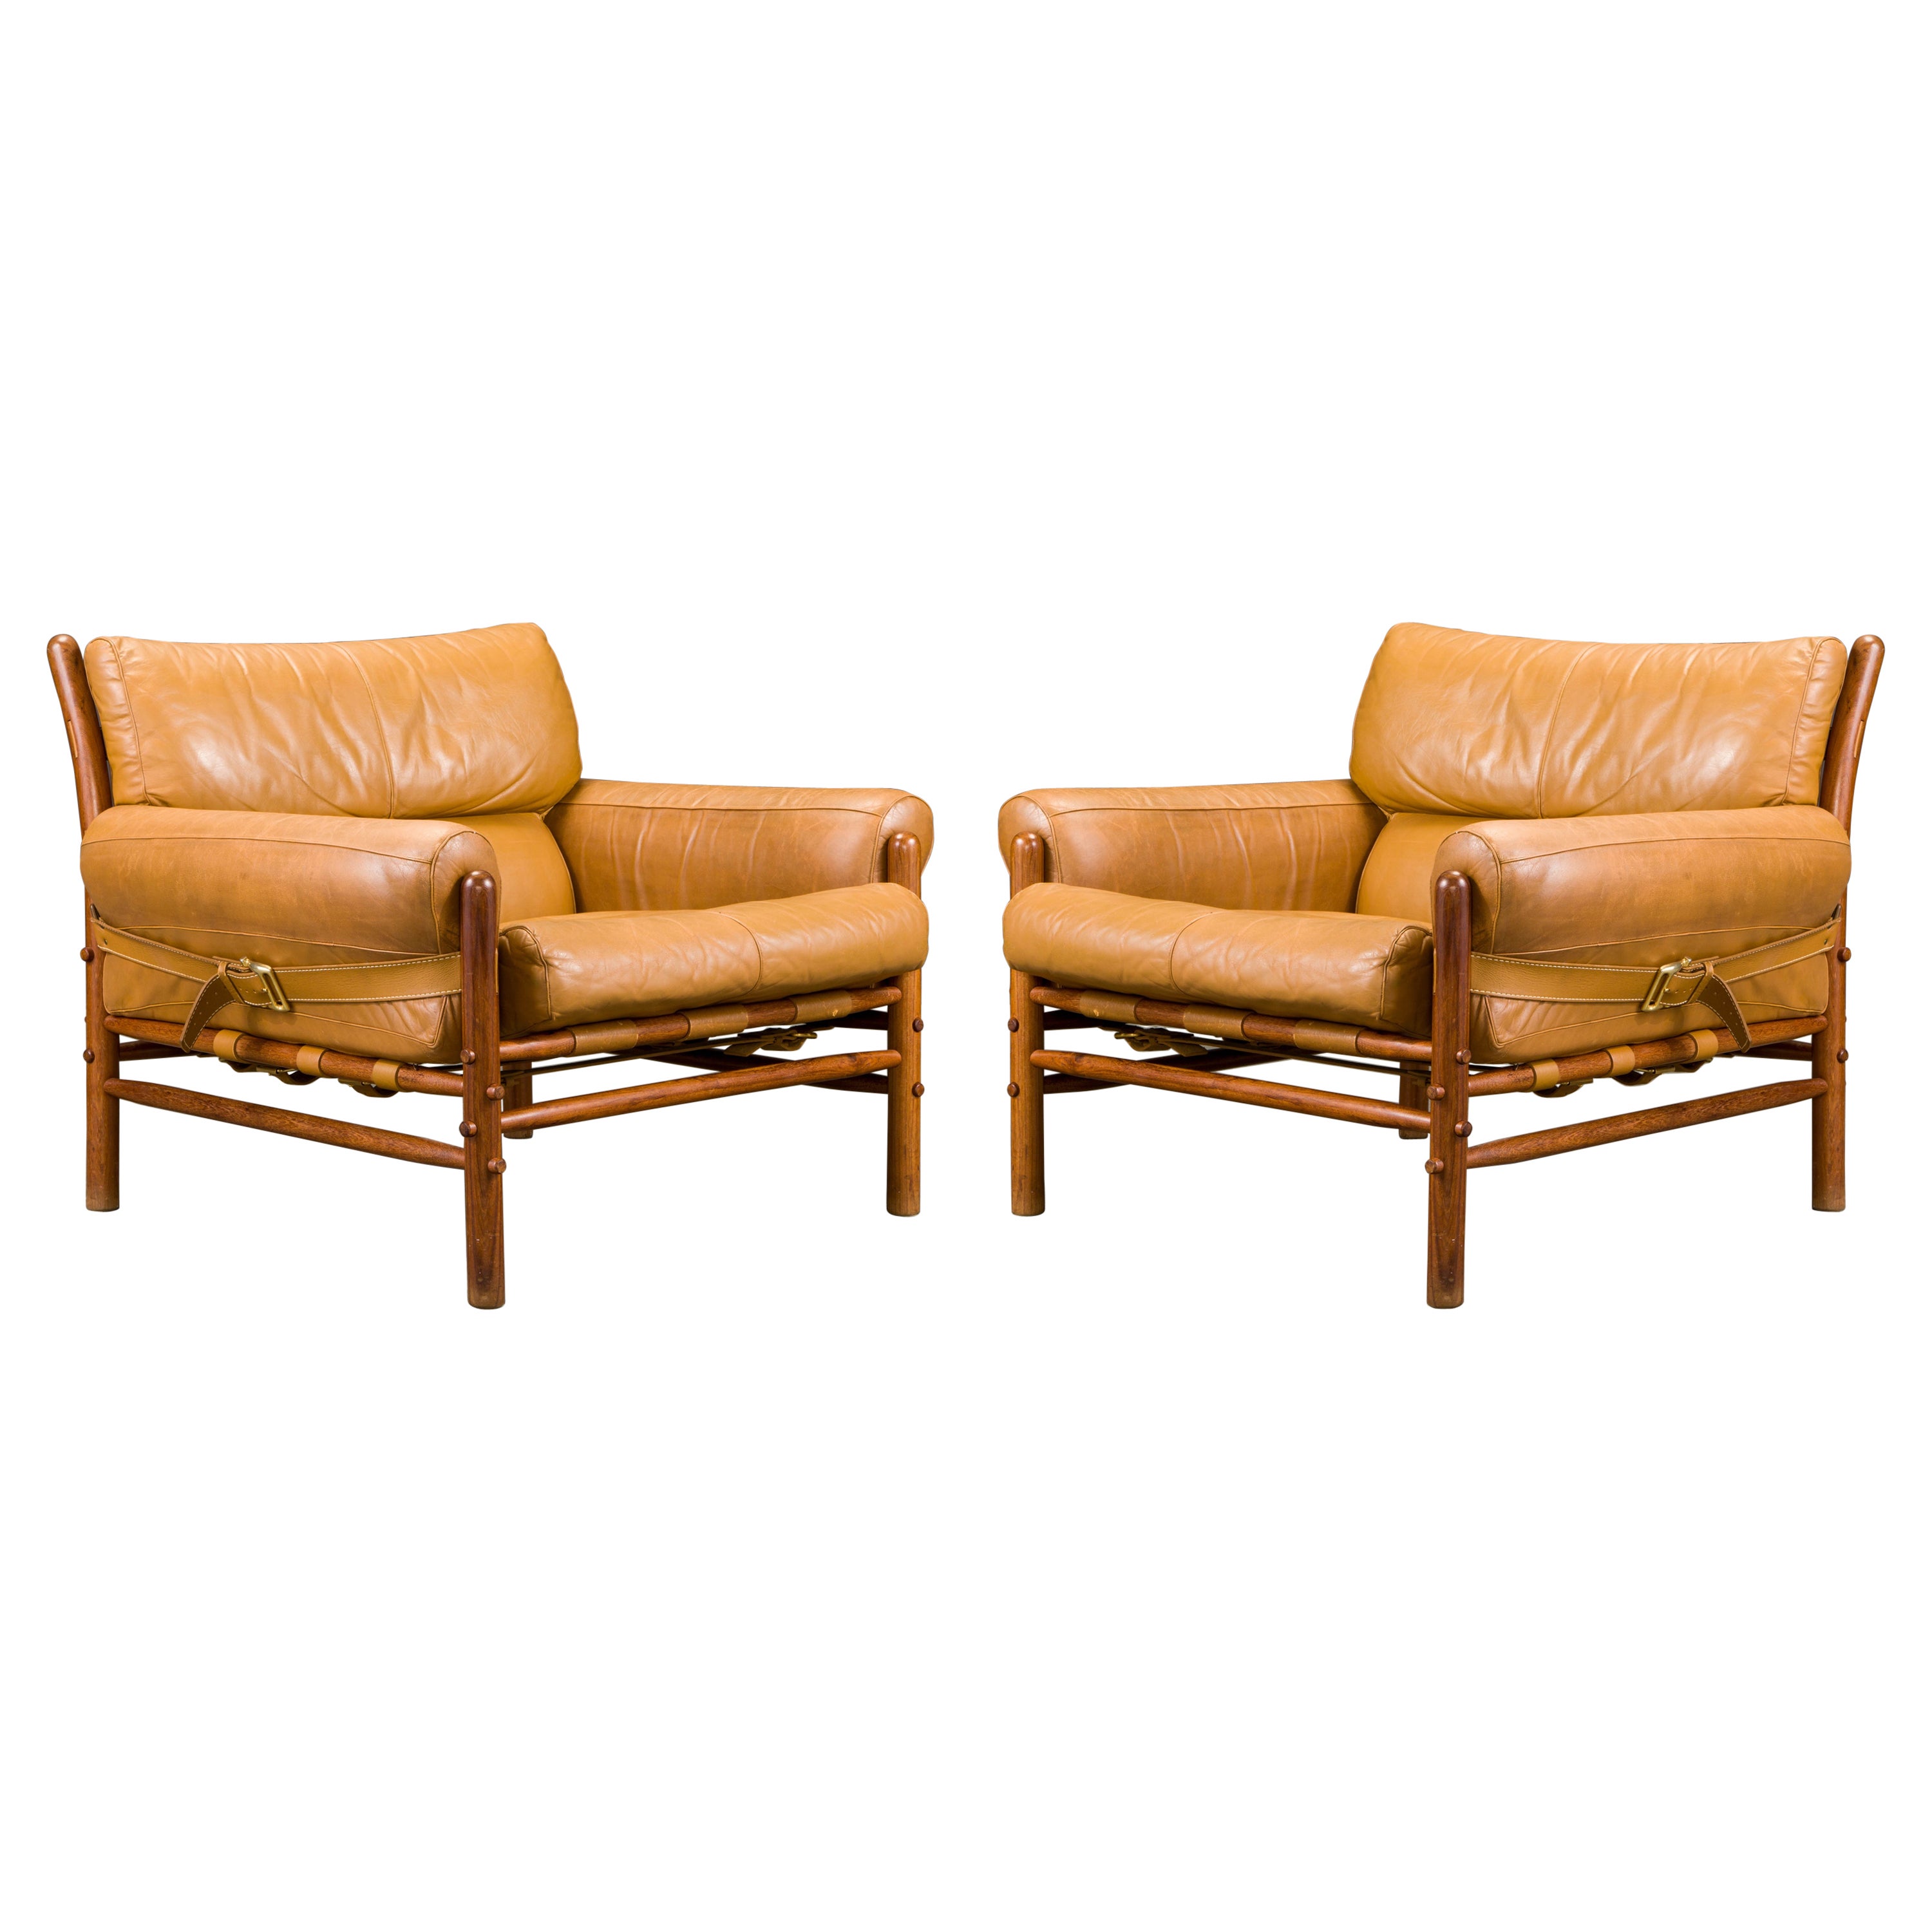 Pair of 'Kontiki' Leather Lounge Chairs by Arne Norell, 1970s, Signed